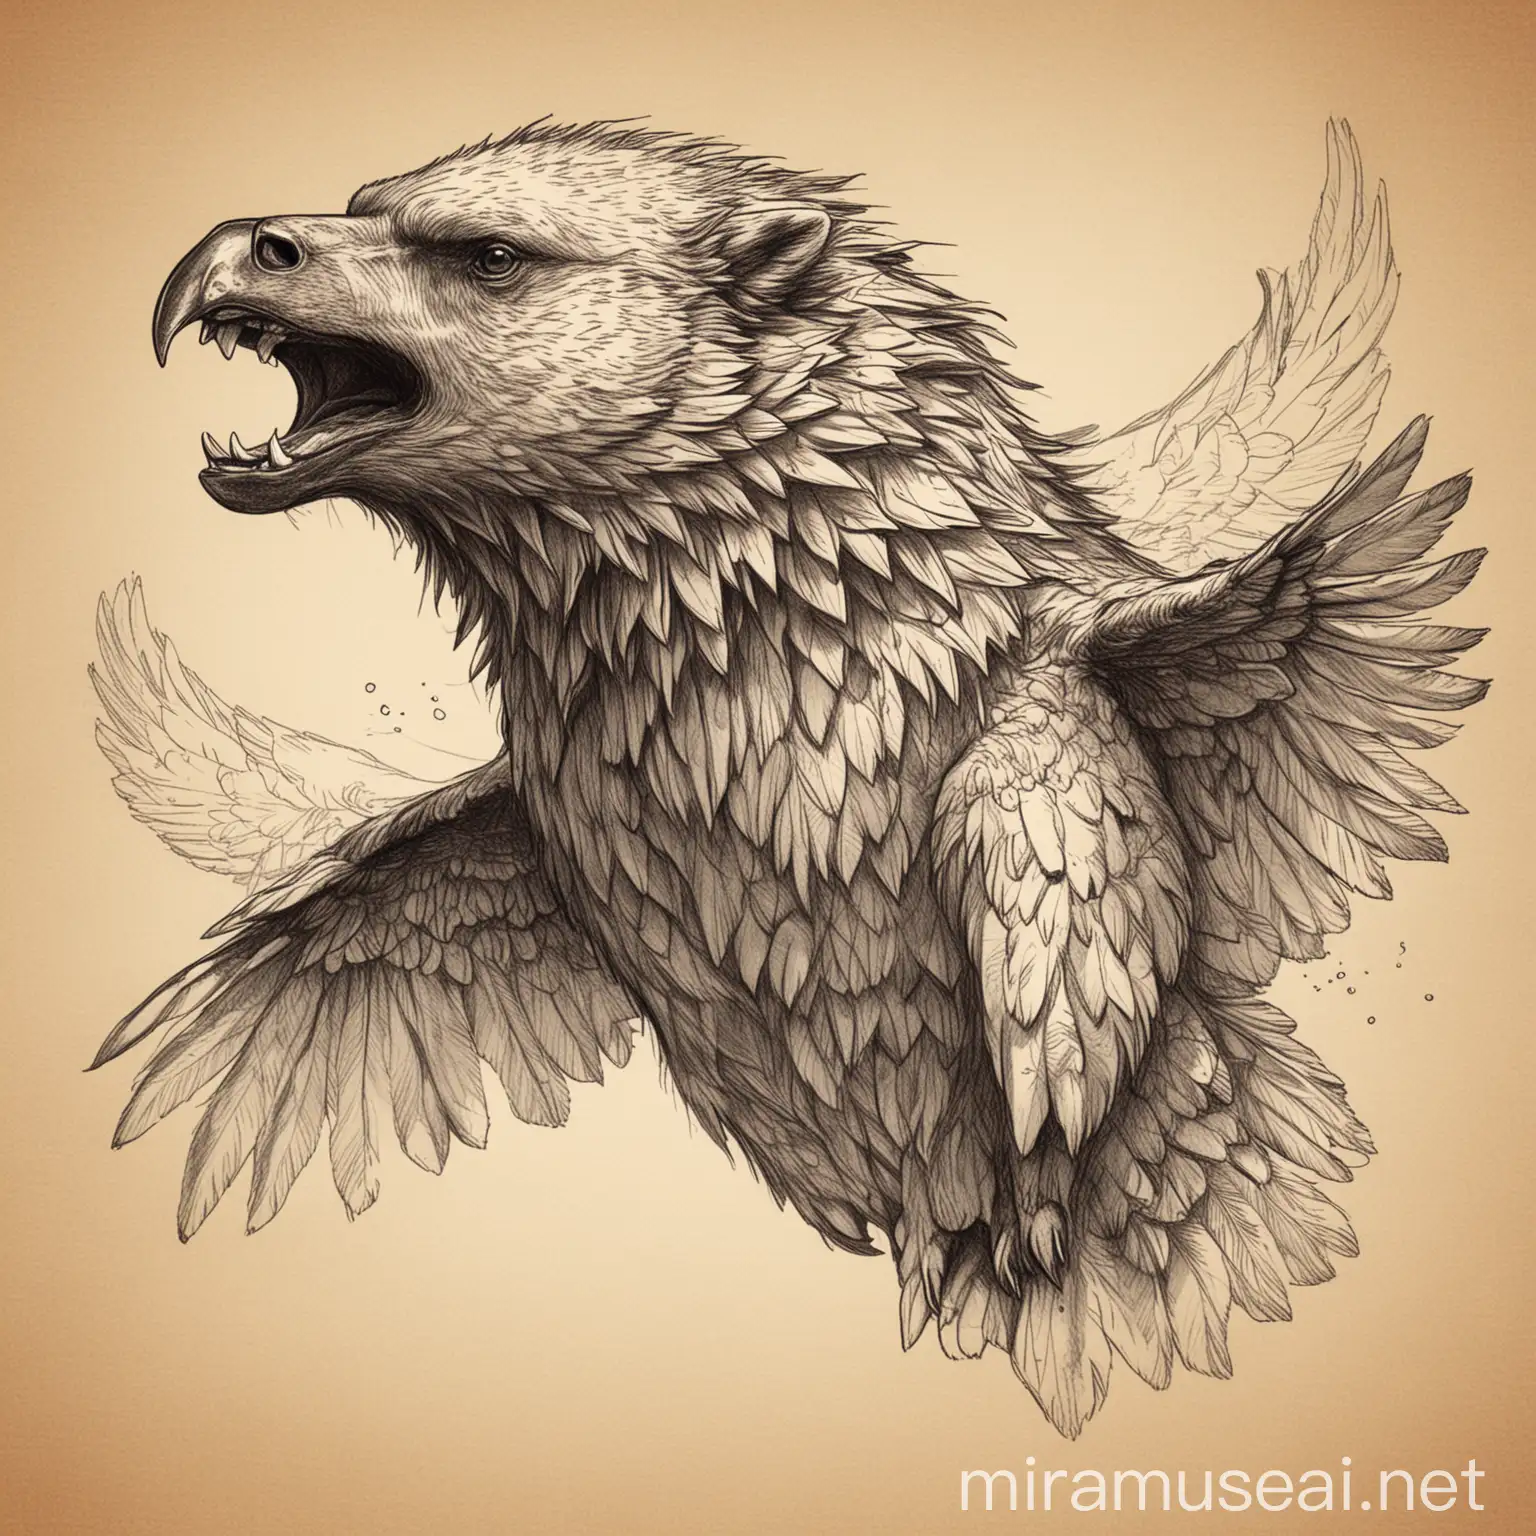 Hybrid Creature Sketch Bear Body with Eagle Wings and Fishlike Head